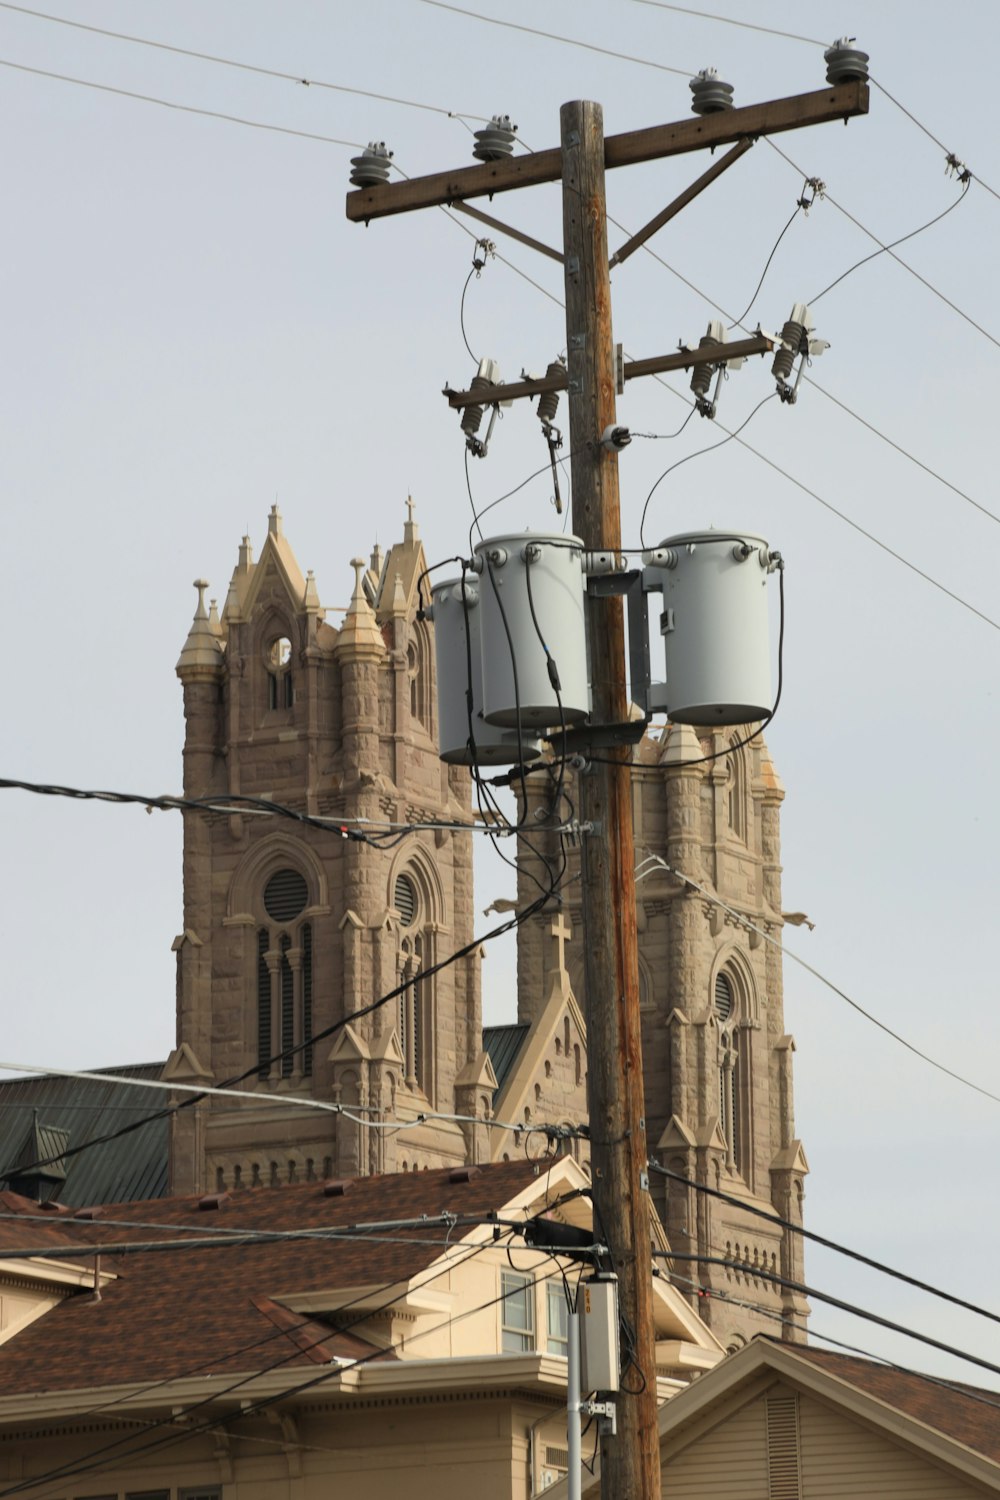 a couple of buckets sitting on top of a power pole